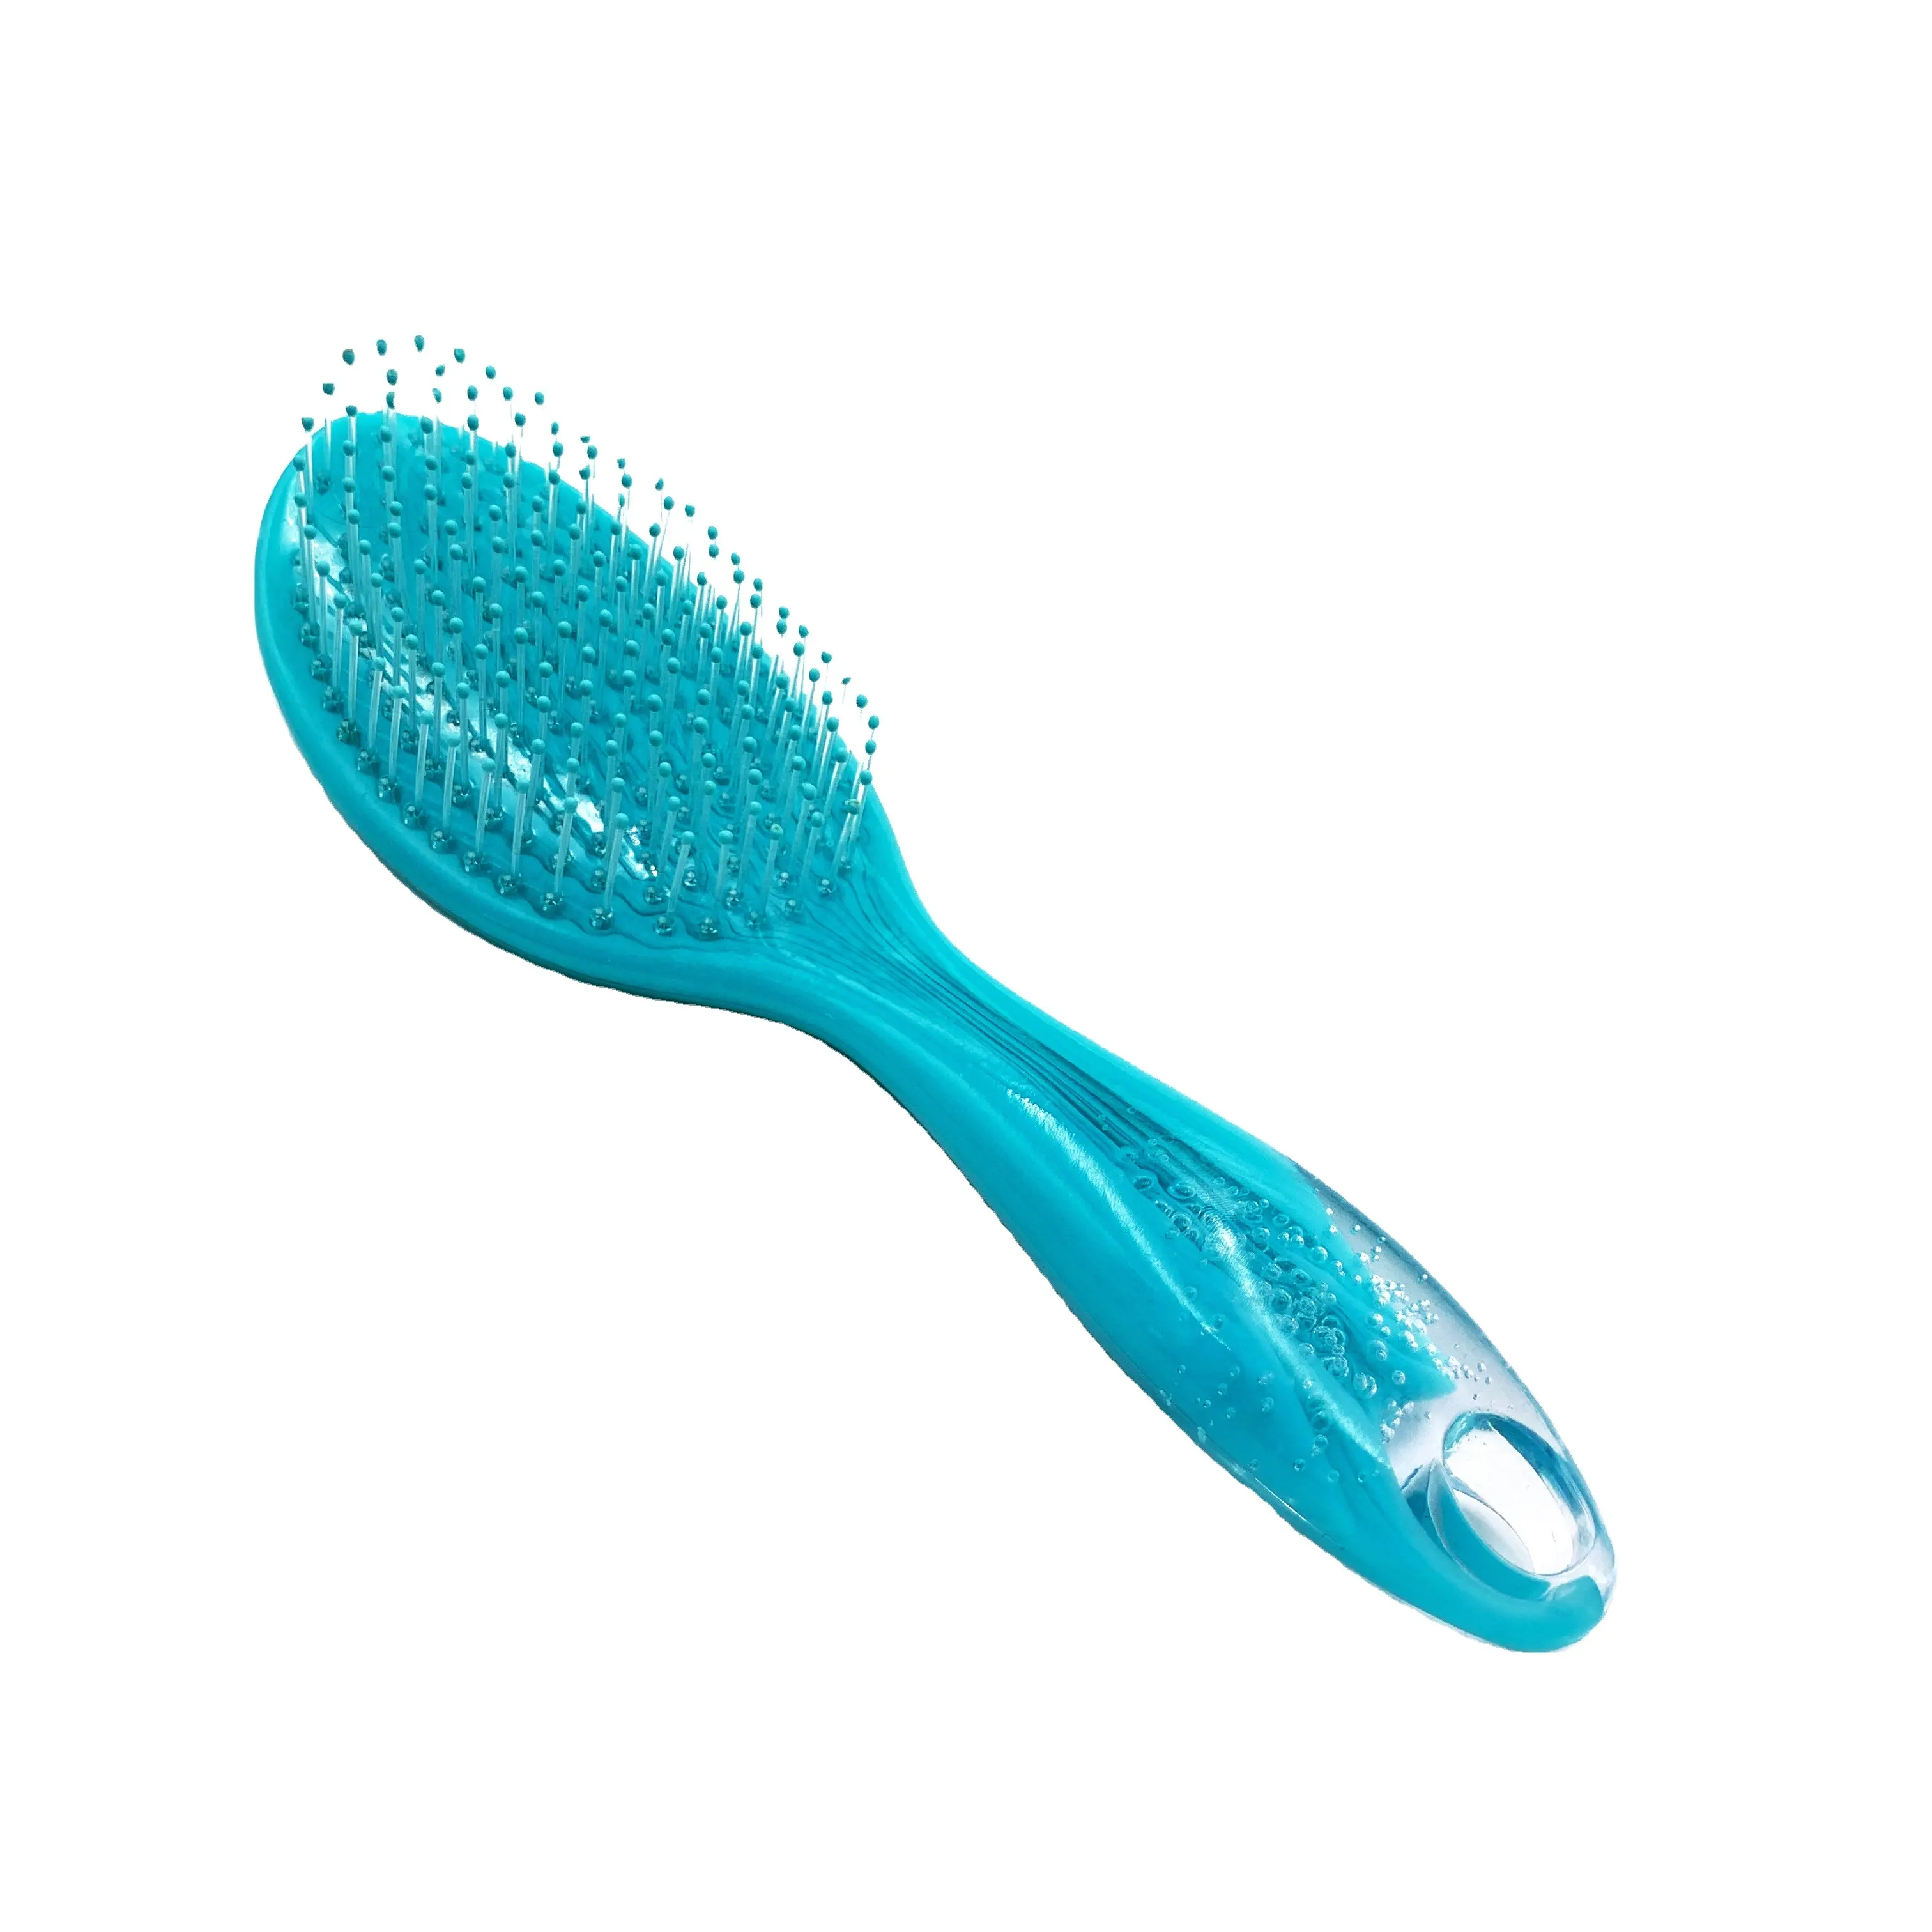 Good combination color match hair brush version as blue sea cool